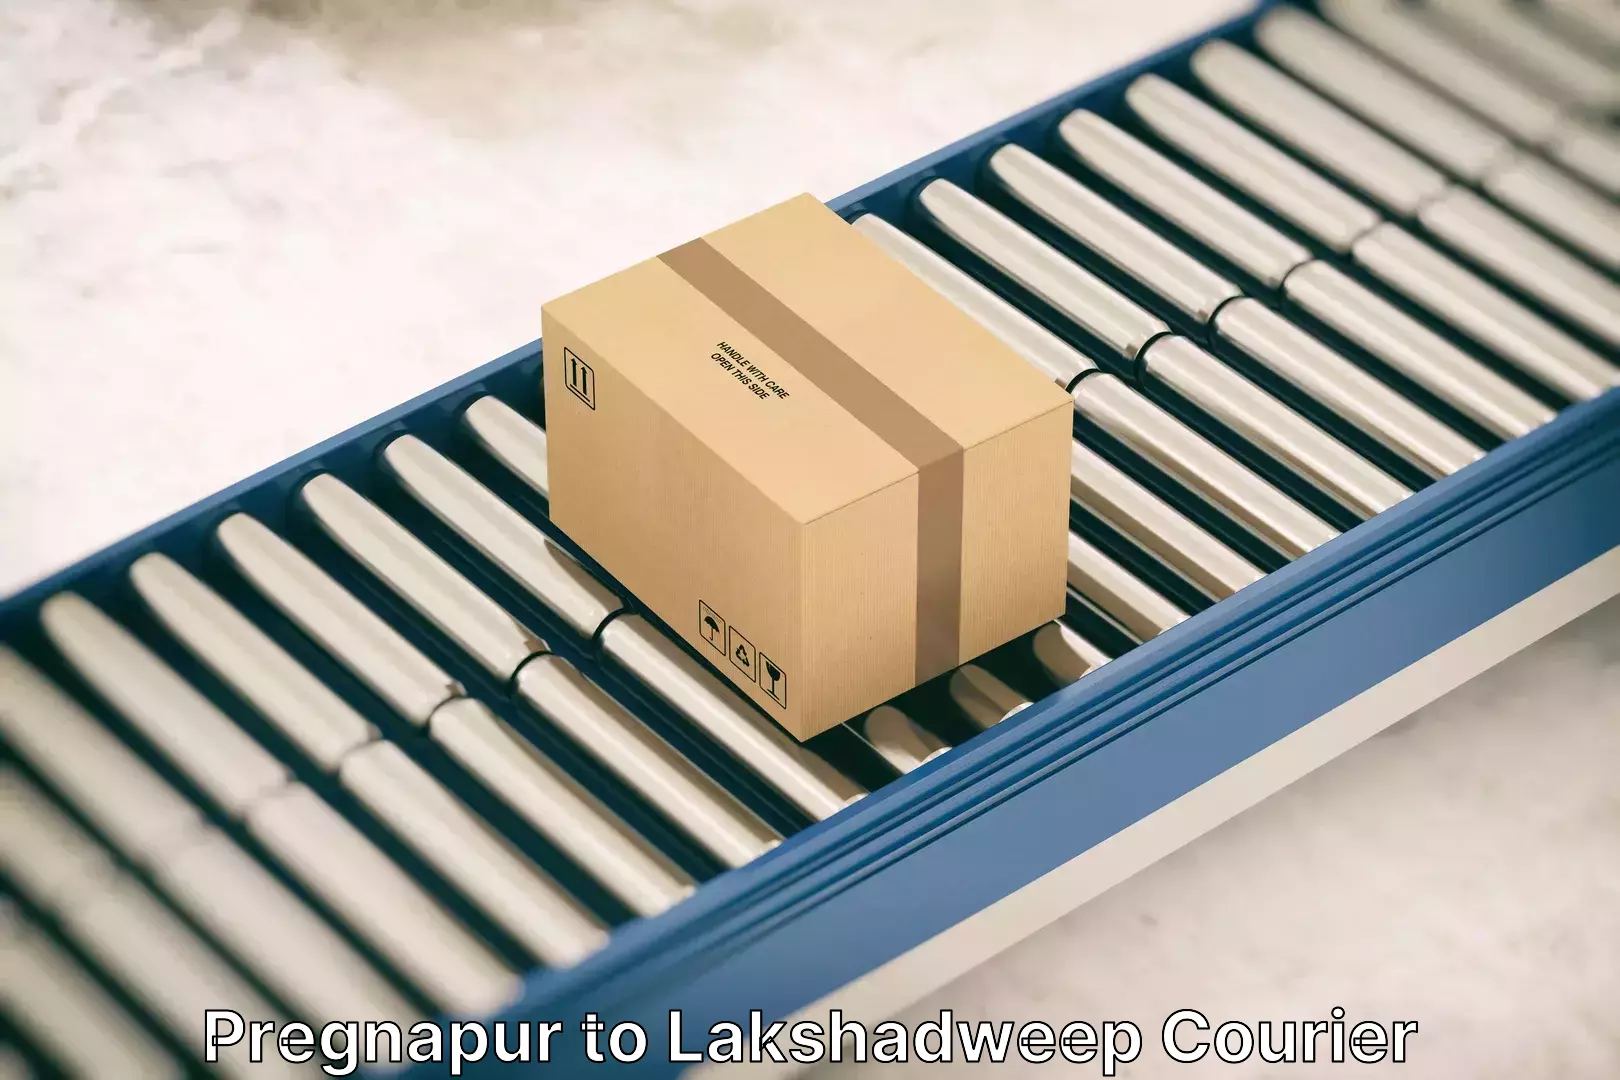 Cost-effective moving options Pregnapur to Lakshadweep